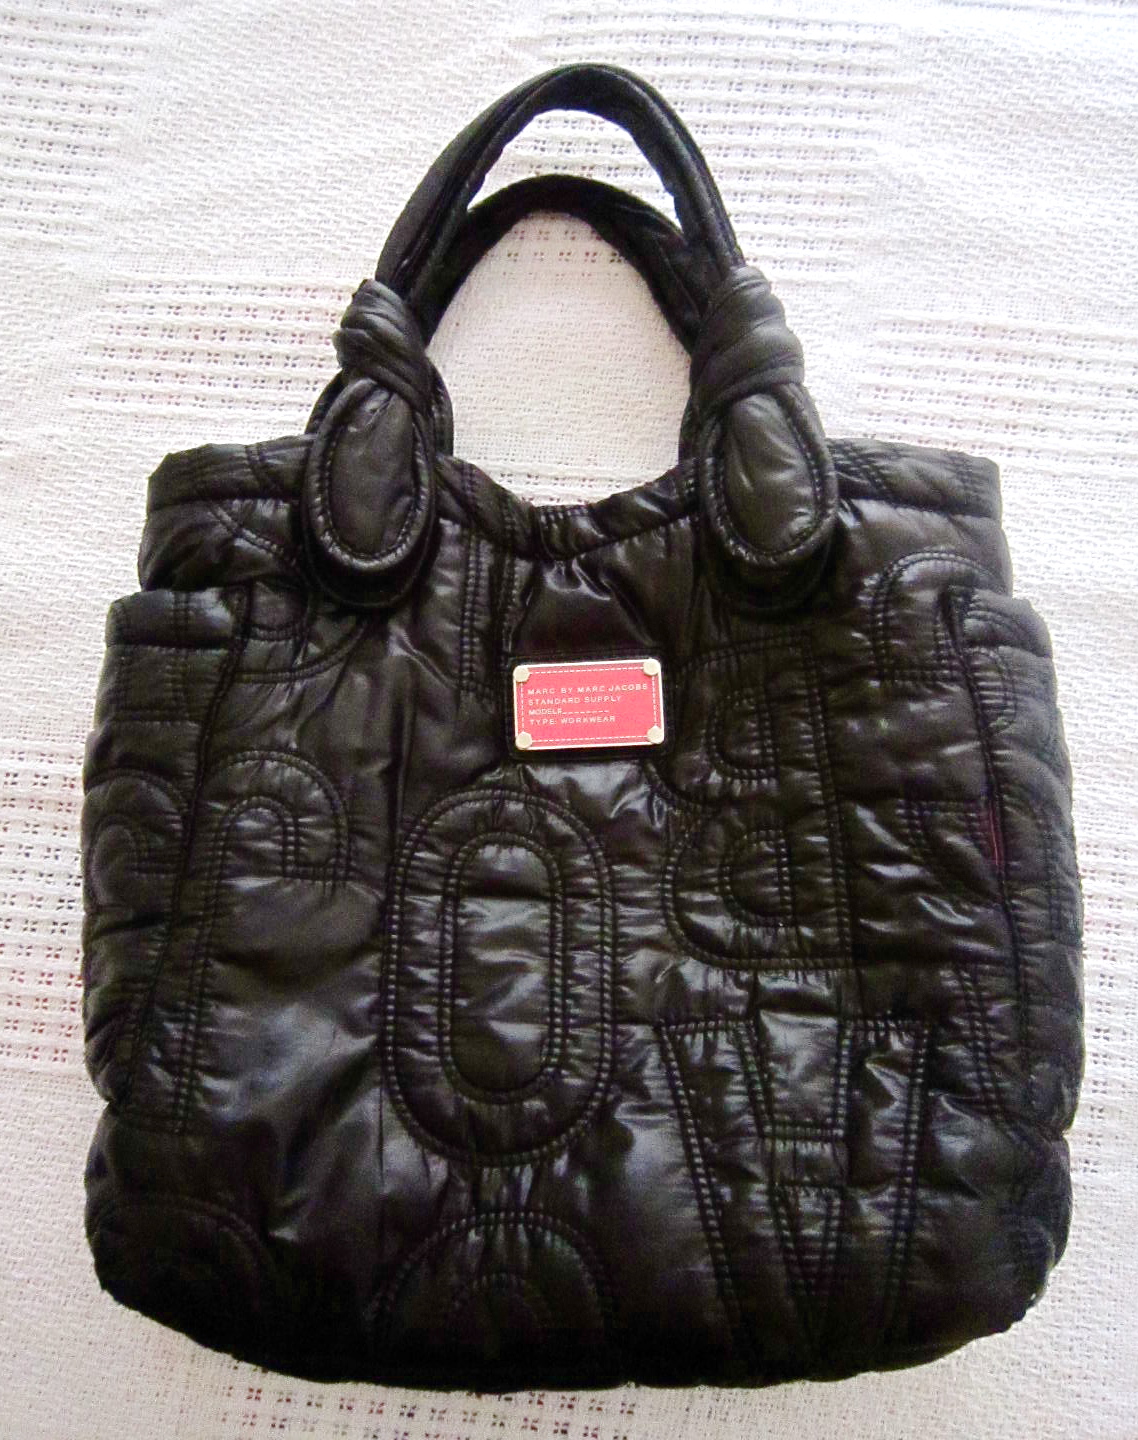 Genuine MARC BY MARC JACOBS Workwear Quilted Handbag. STANDARD SUPPLY Nylon  Tote